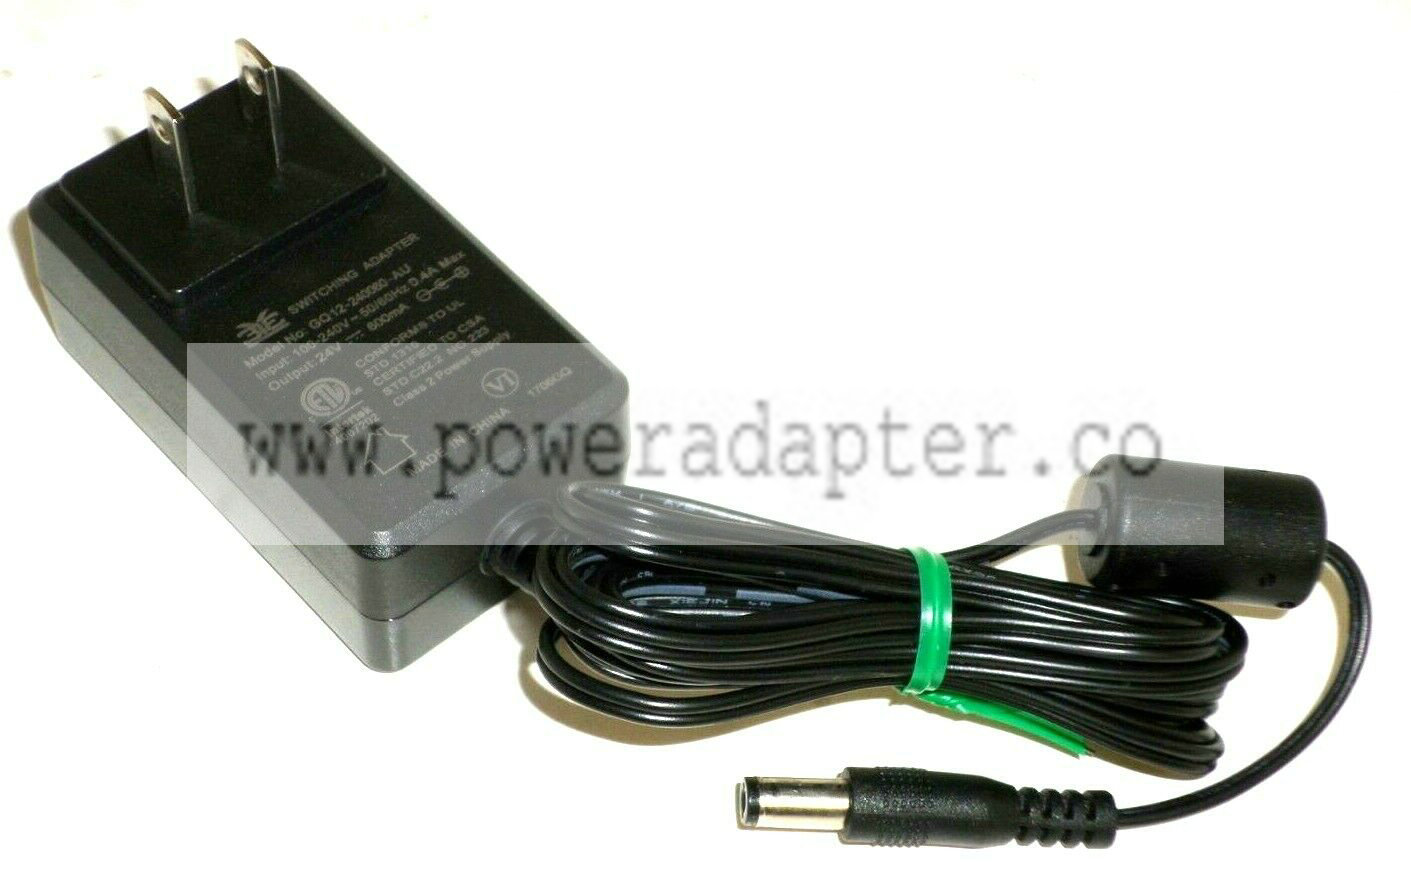 3YE Switching Power Supply Adapter 24V 600mA Model GQ12-240060-AU Item Condition: Item is lightly used and 100% wo - Click Image to Close